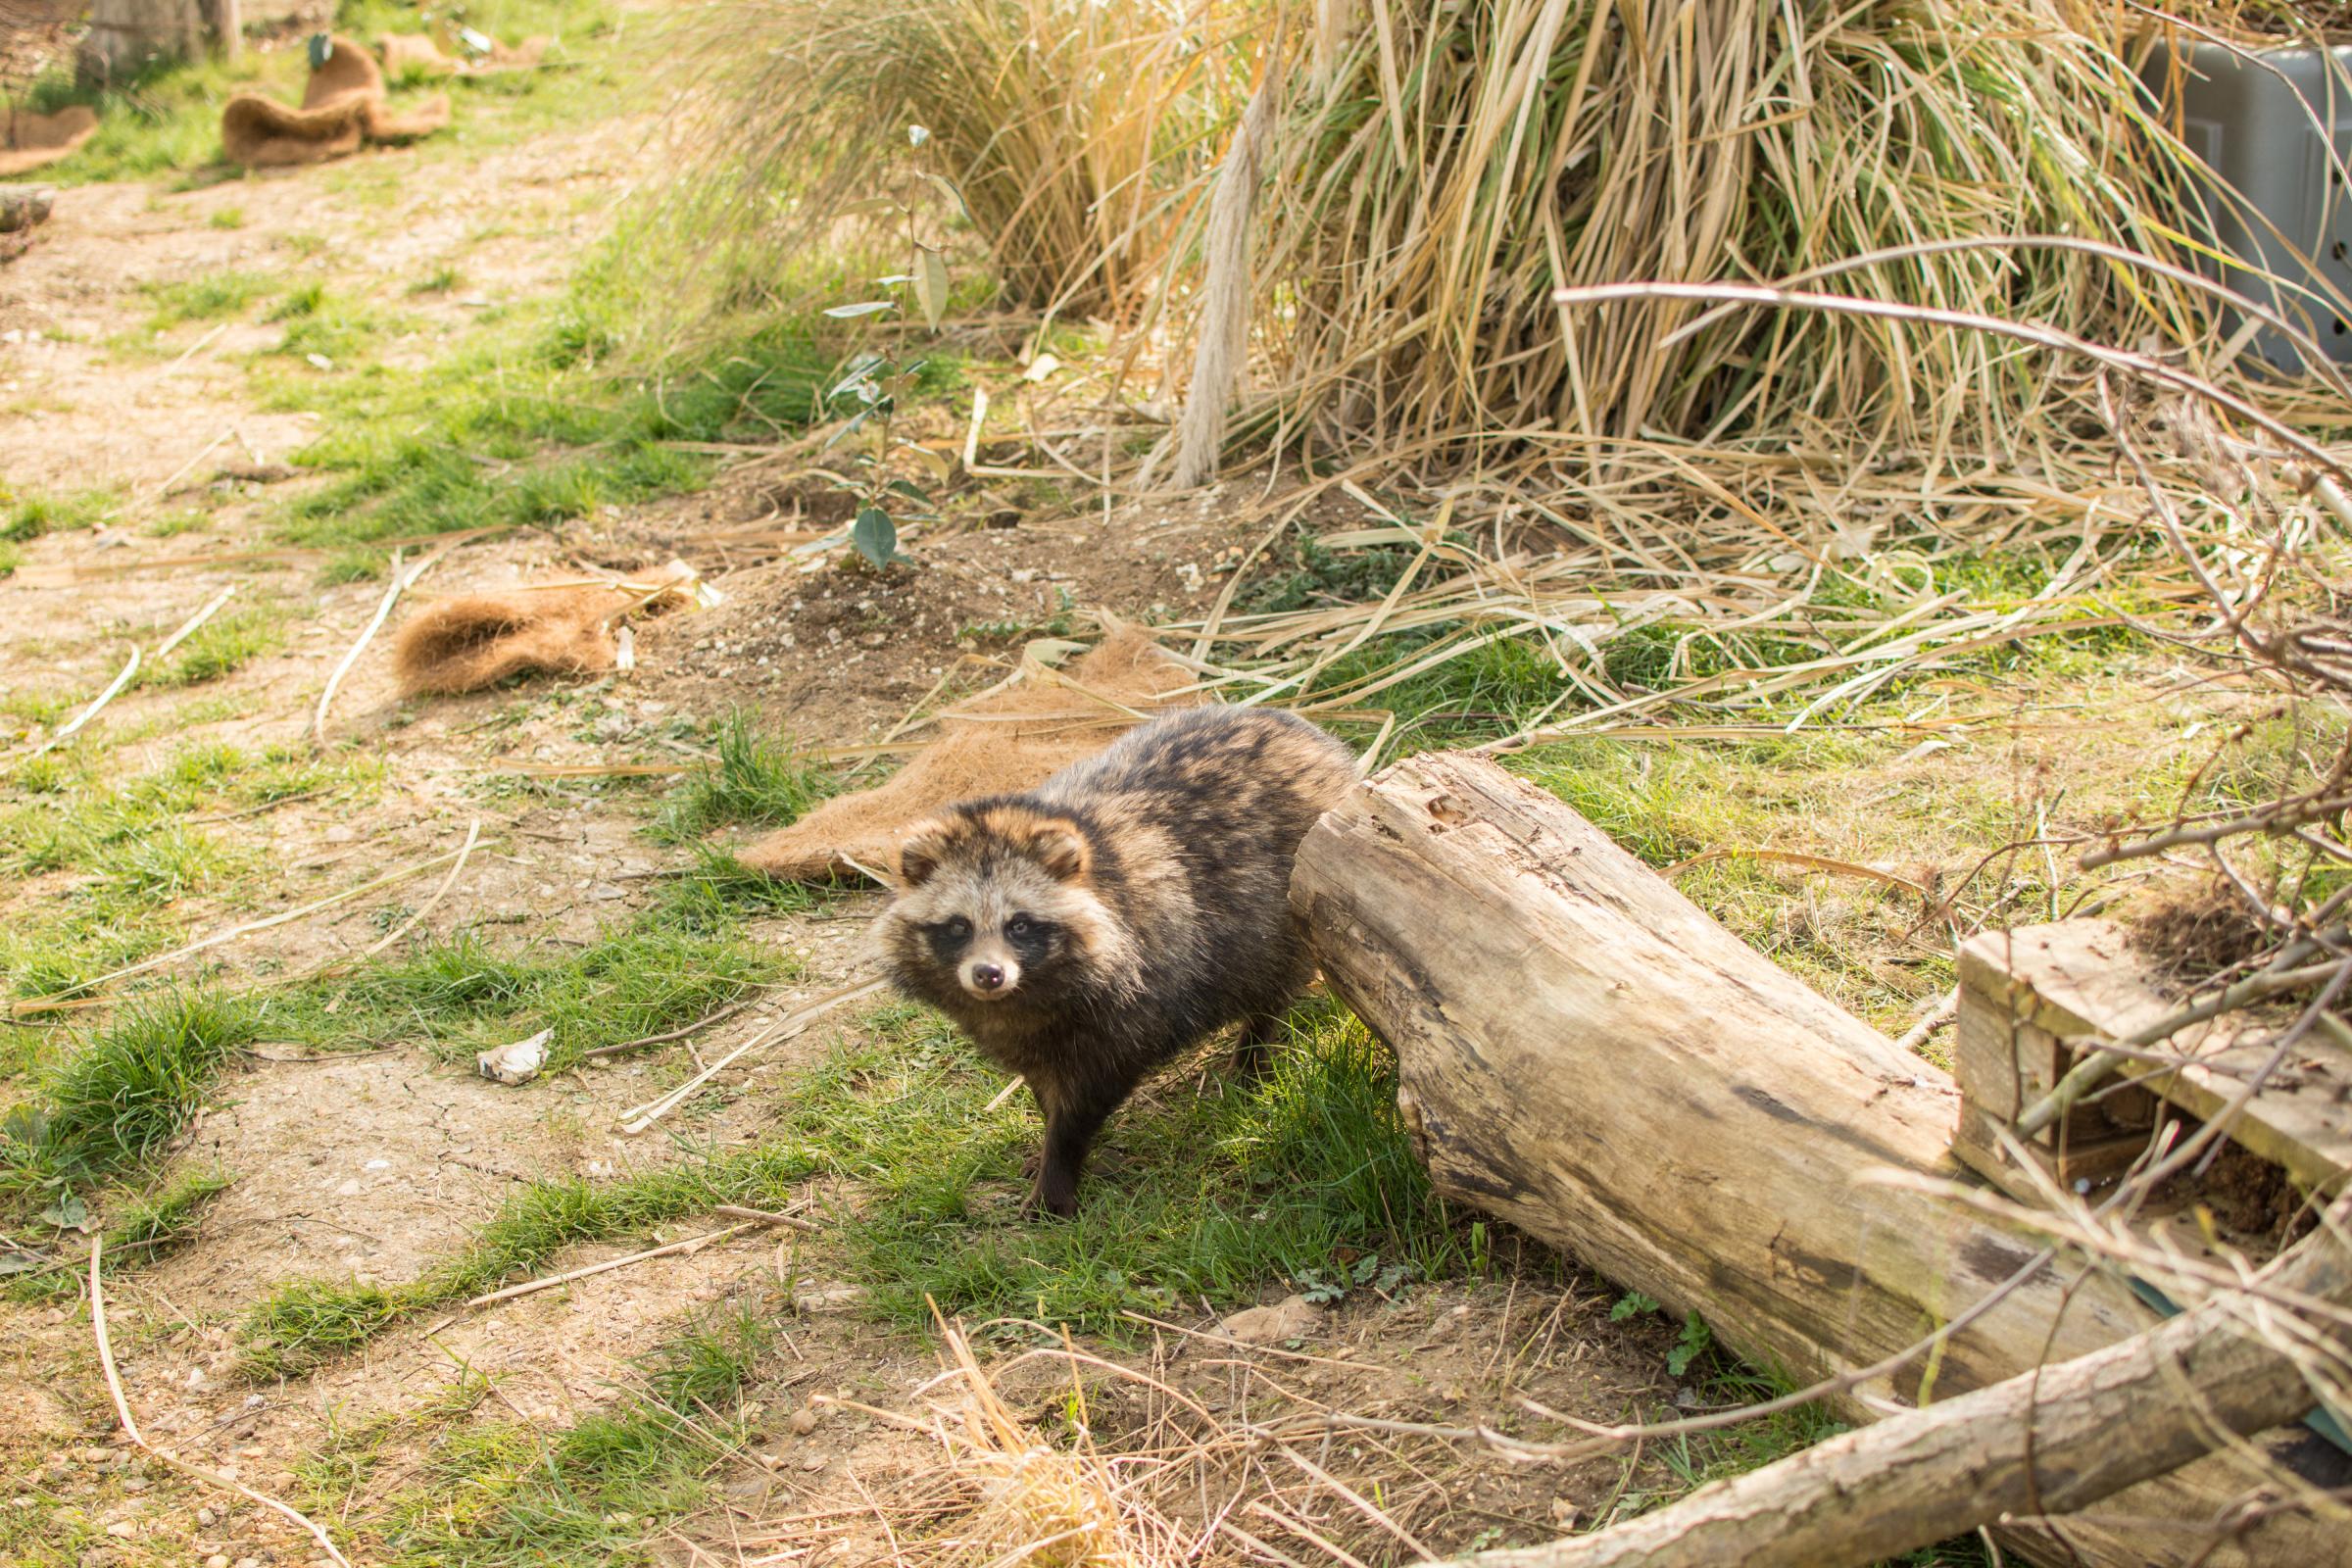 The exotic animals rescued in Herts - including the rescue of a raccoon dog